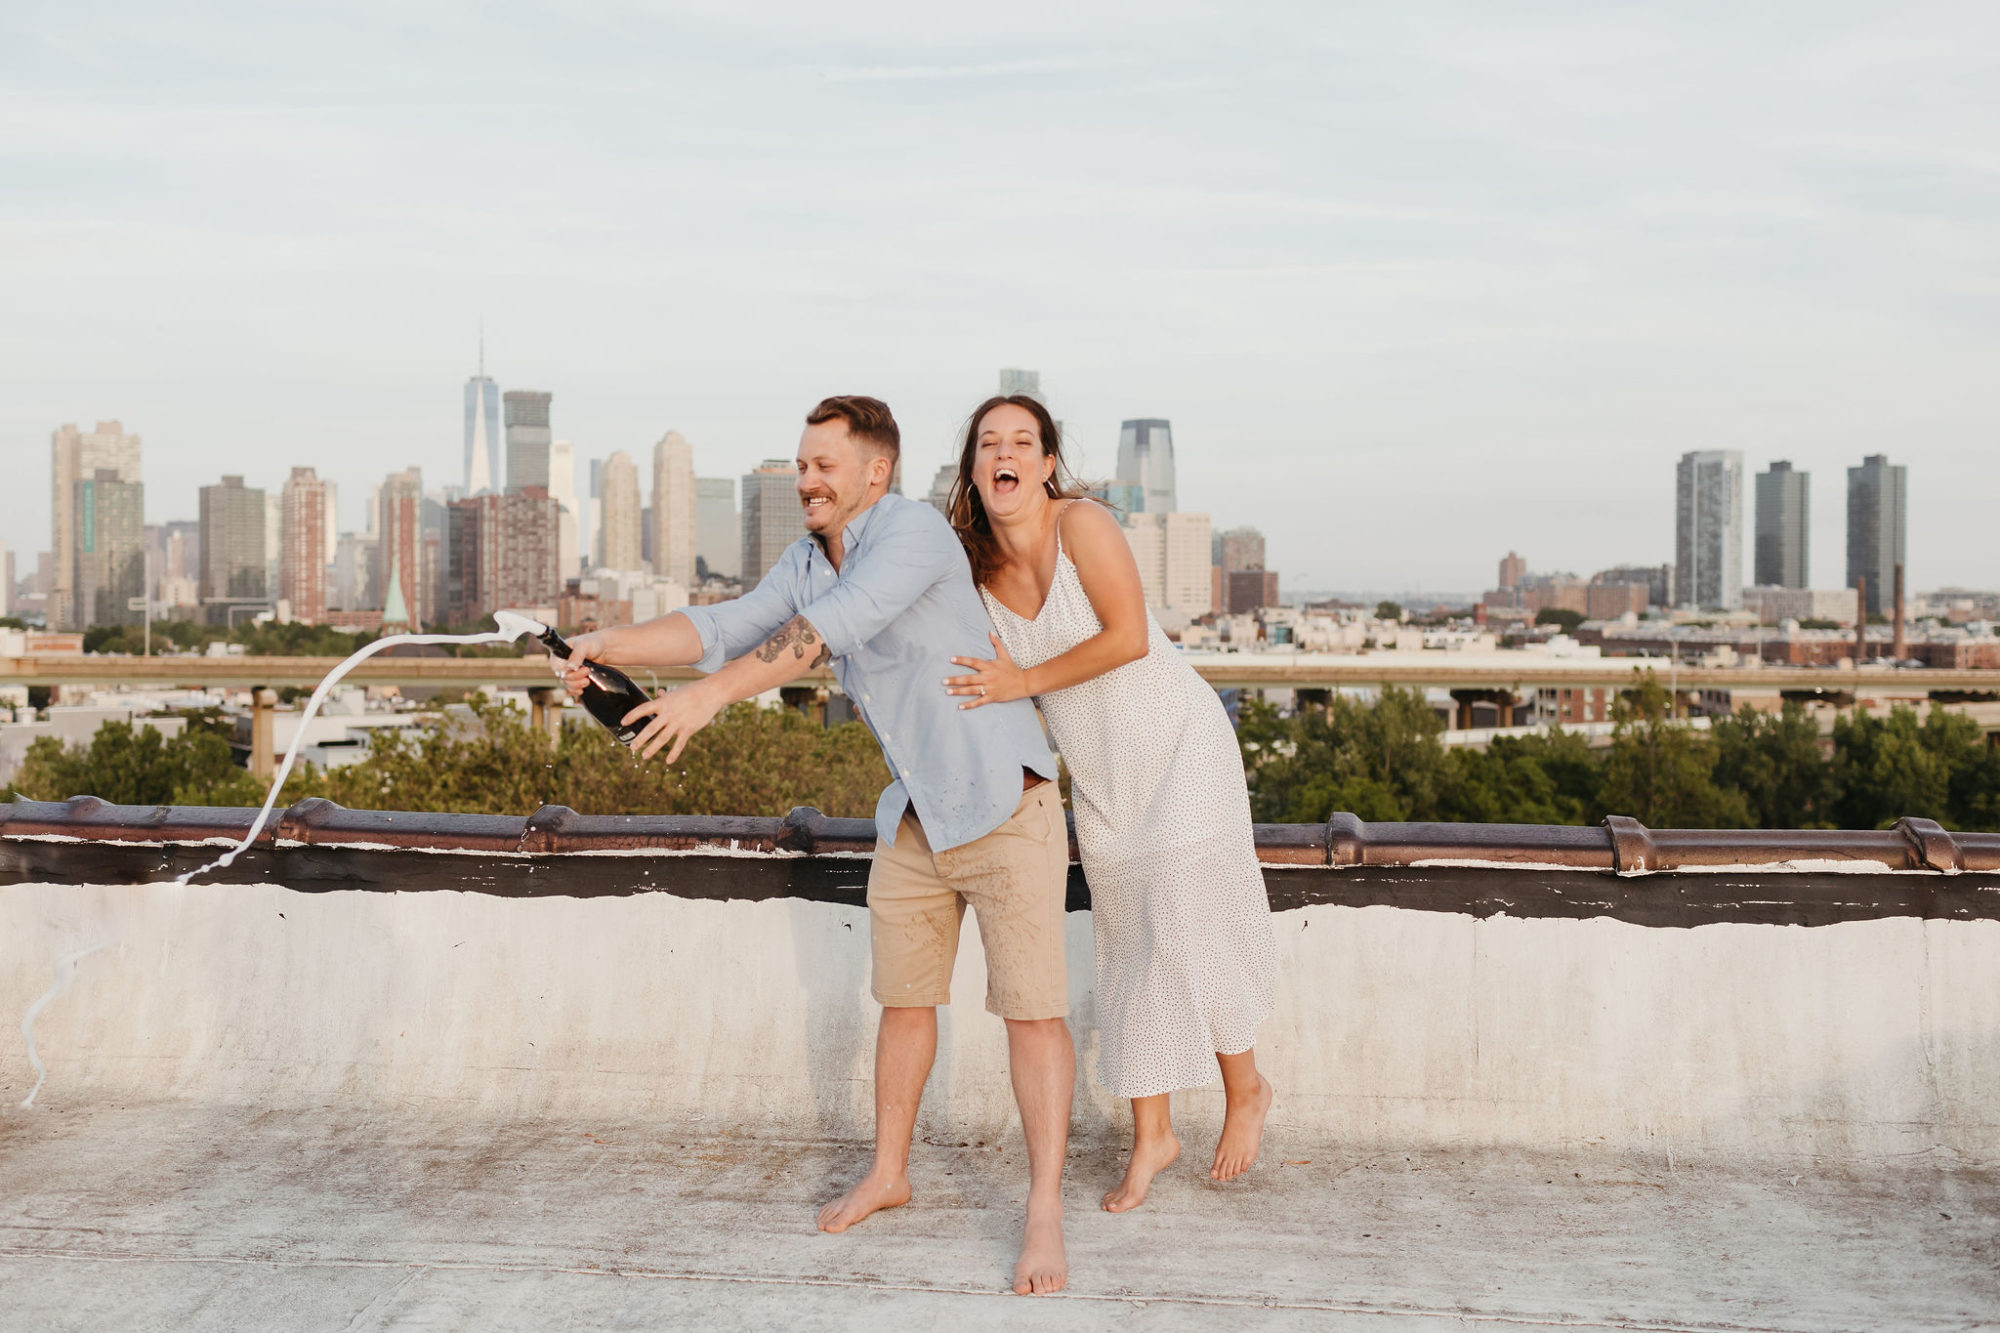 urban, city engagement shoot, rooftop photos, dog engagement pictures, casual couple photos, hudson valley, troy new york, hudson valley photographer